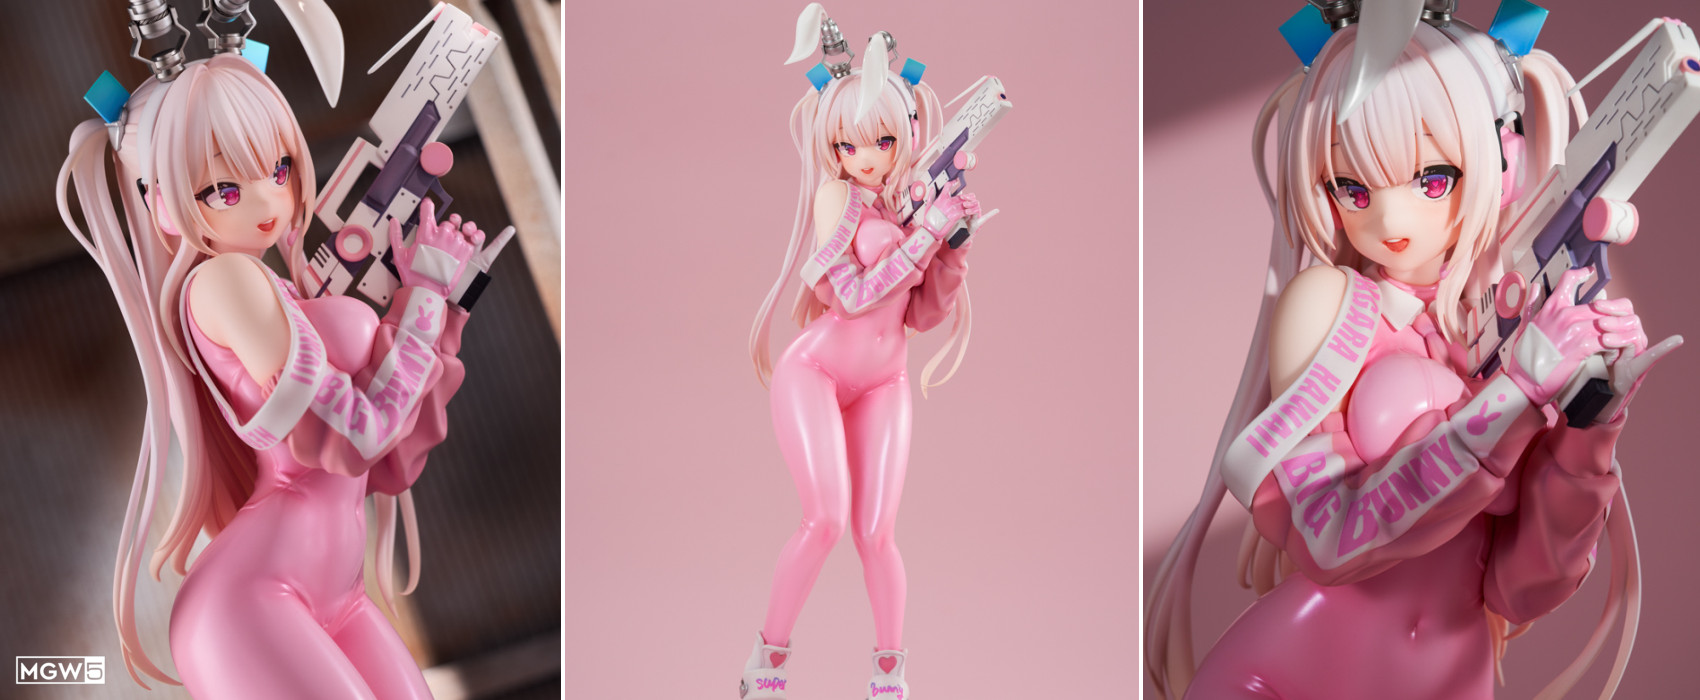 Superbunny Normal Edition by Hobby Sakura with illustration by DDUCK KONG MyGrailWatch Anime Figure Guide